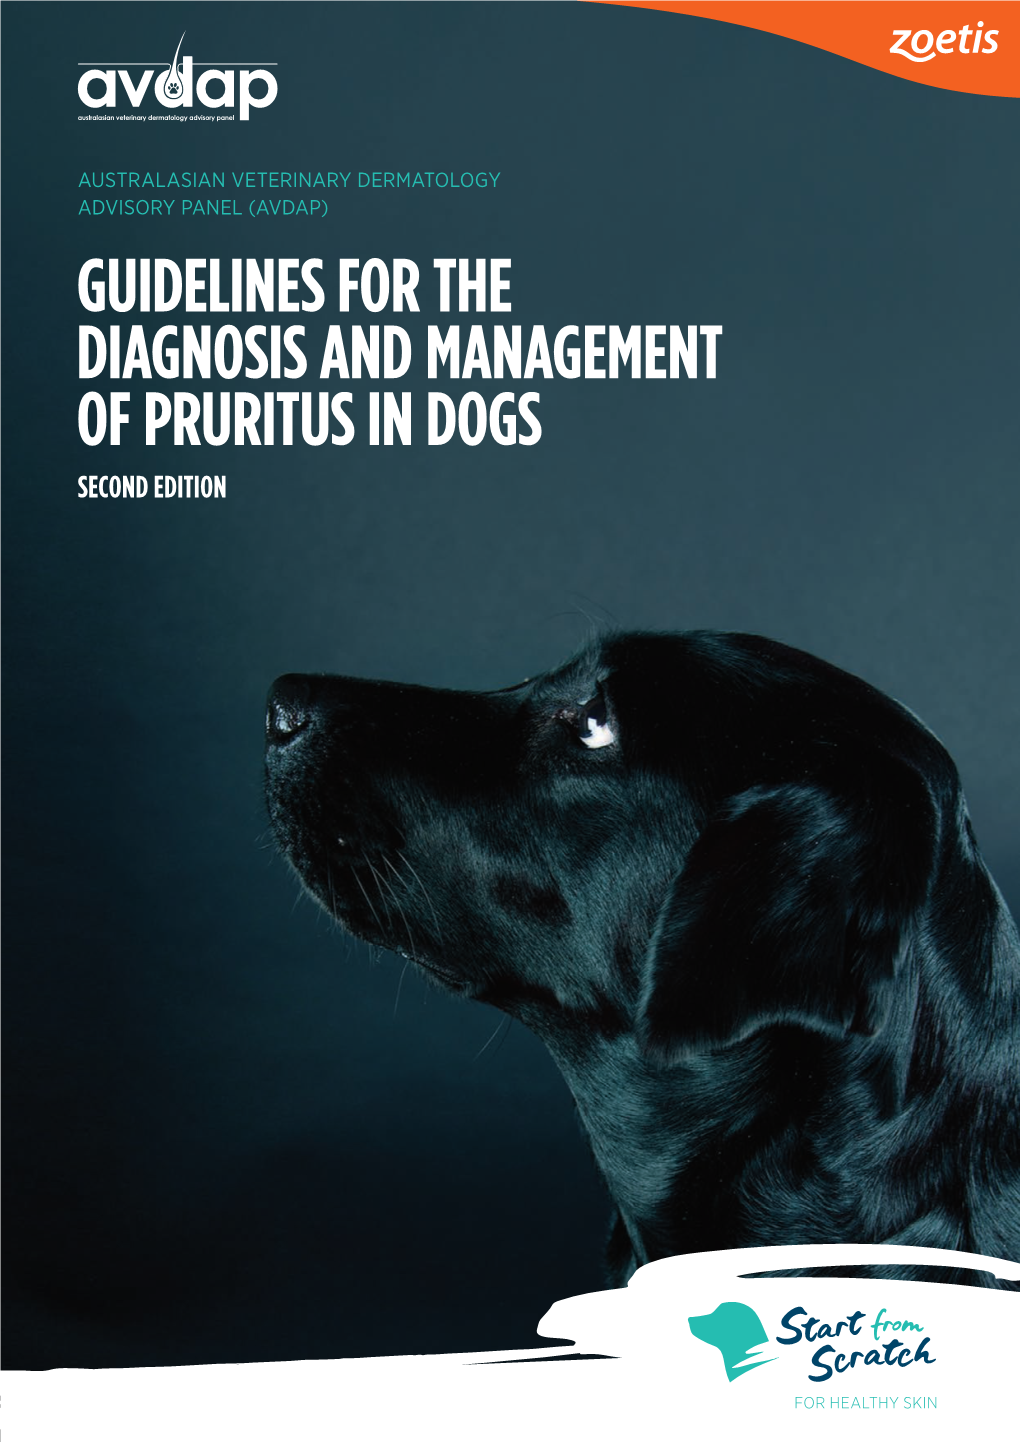 Guidelines for the Diagnosis and Management of Pruritus in Dogs Second Edition